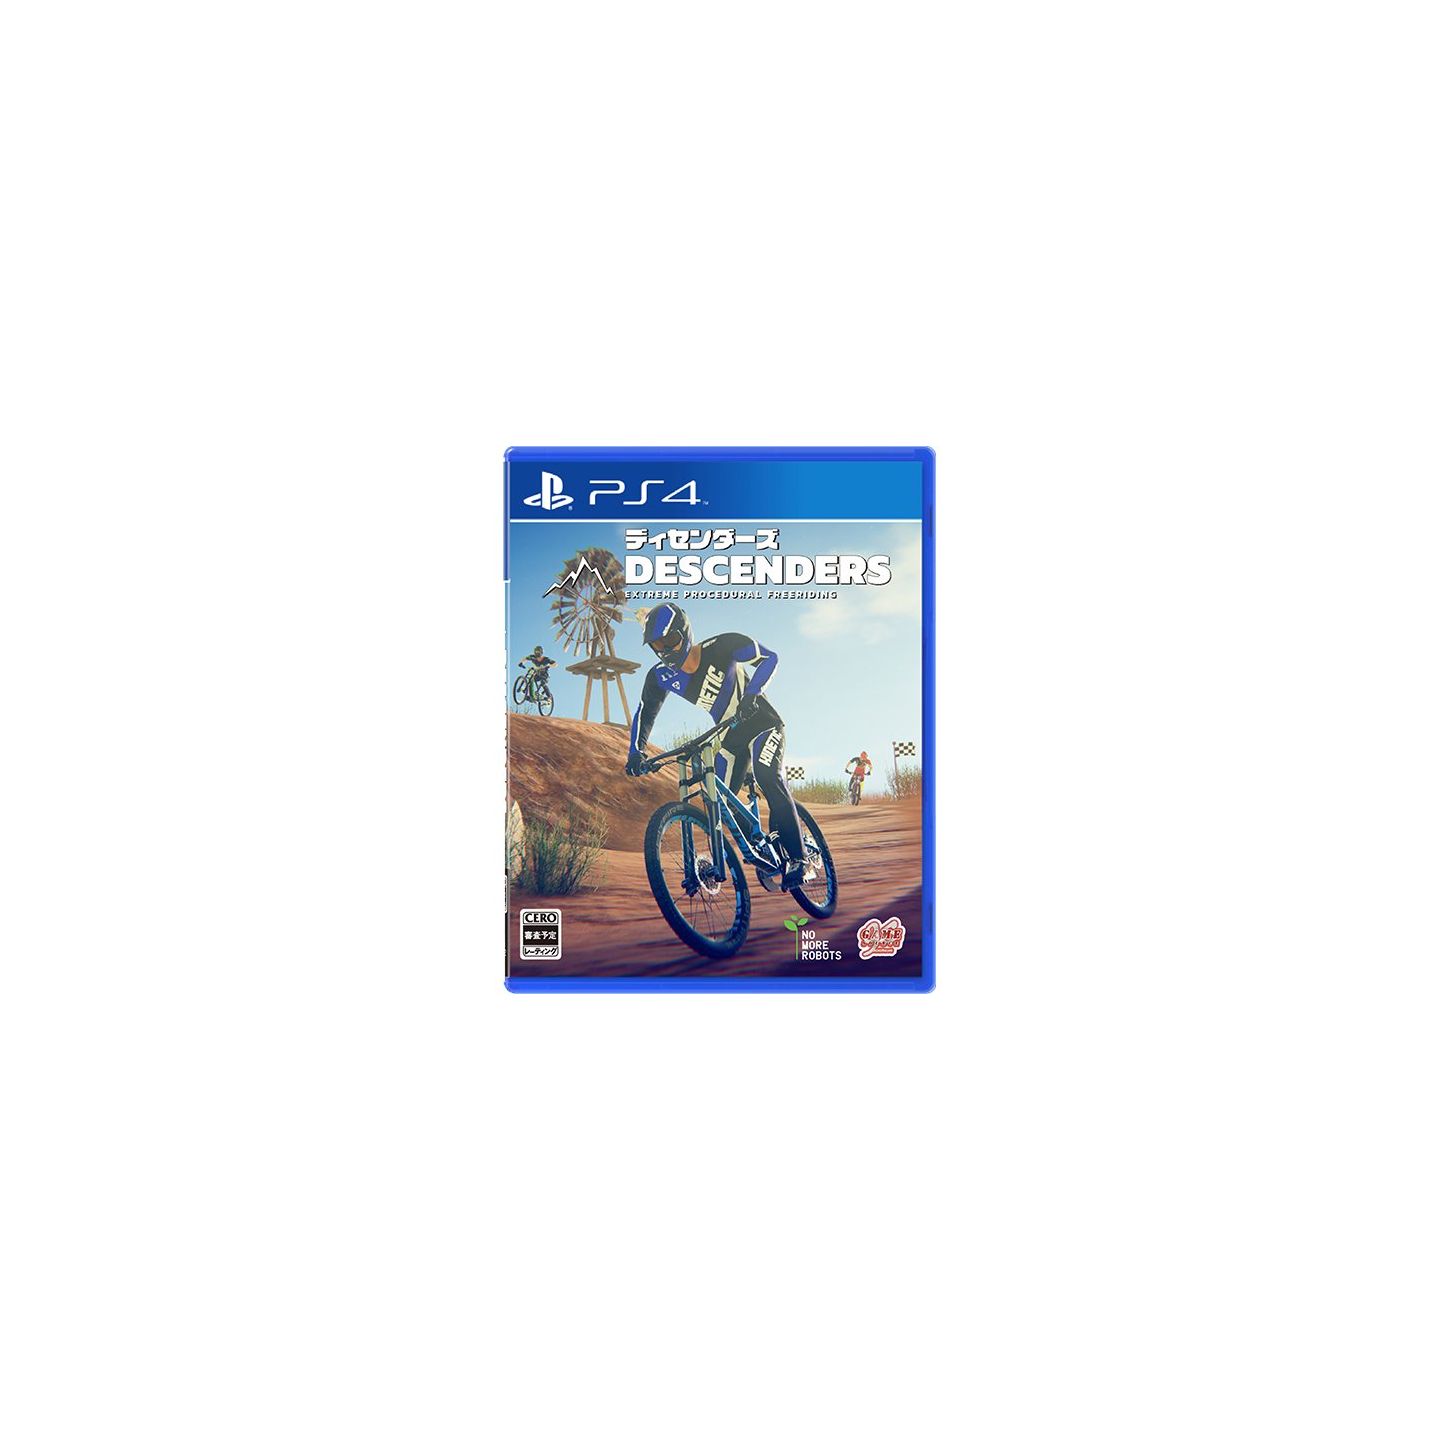 Playstation 4 Descenders PS4 Entertainment Source Game